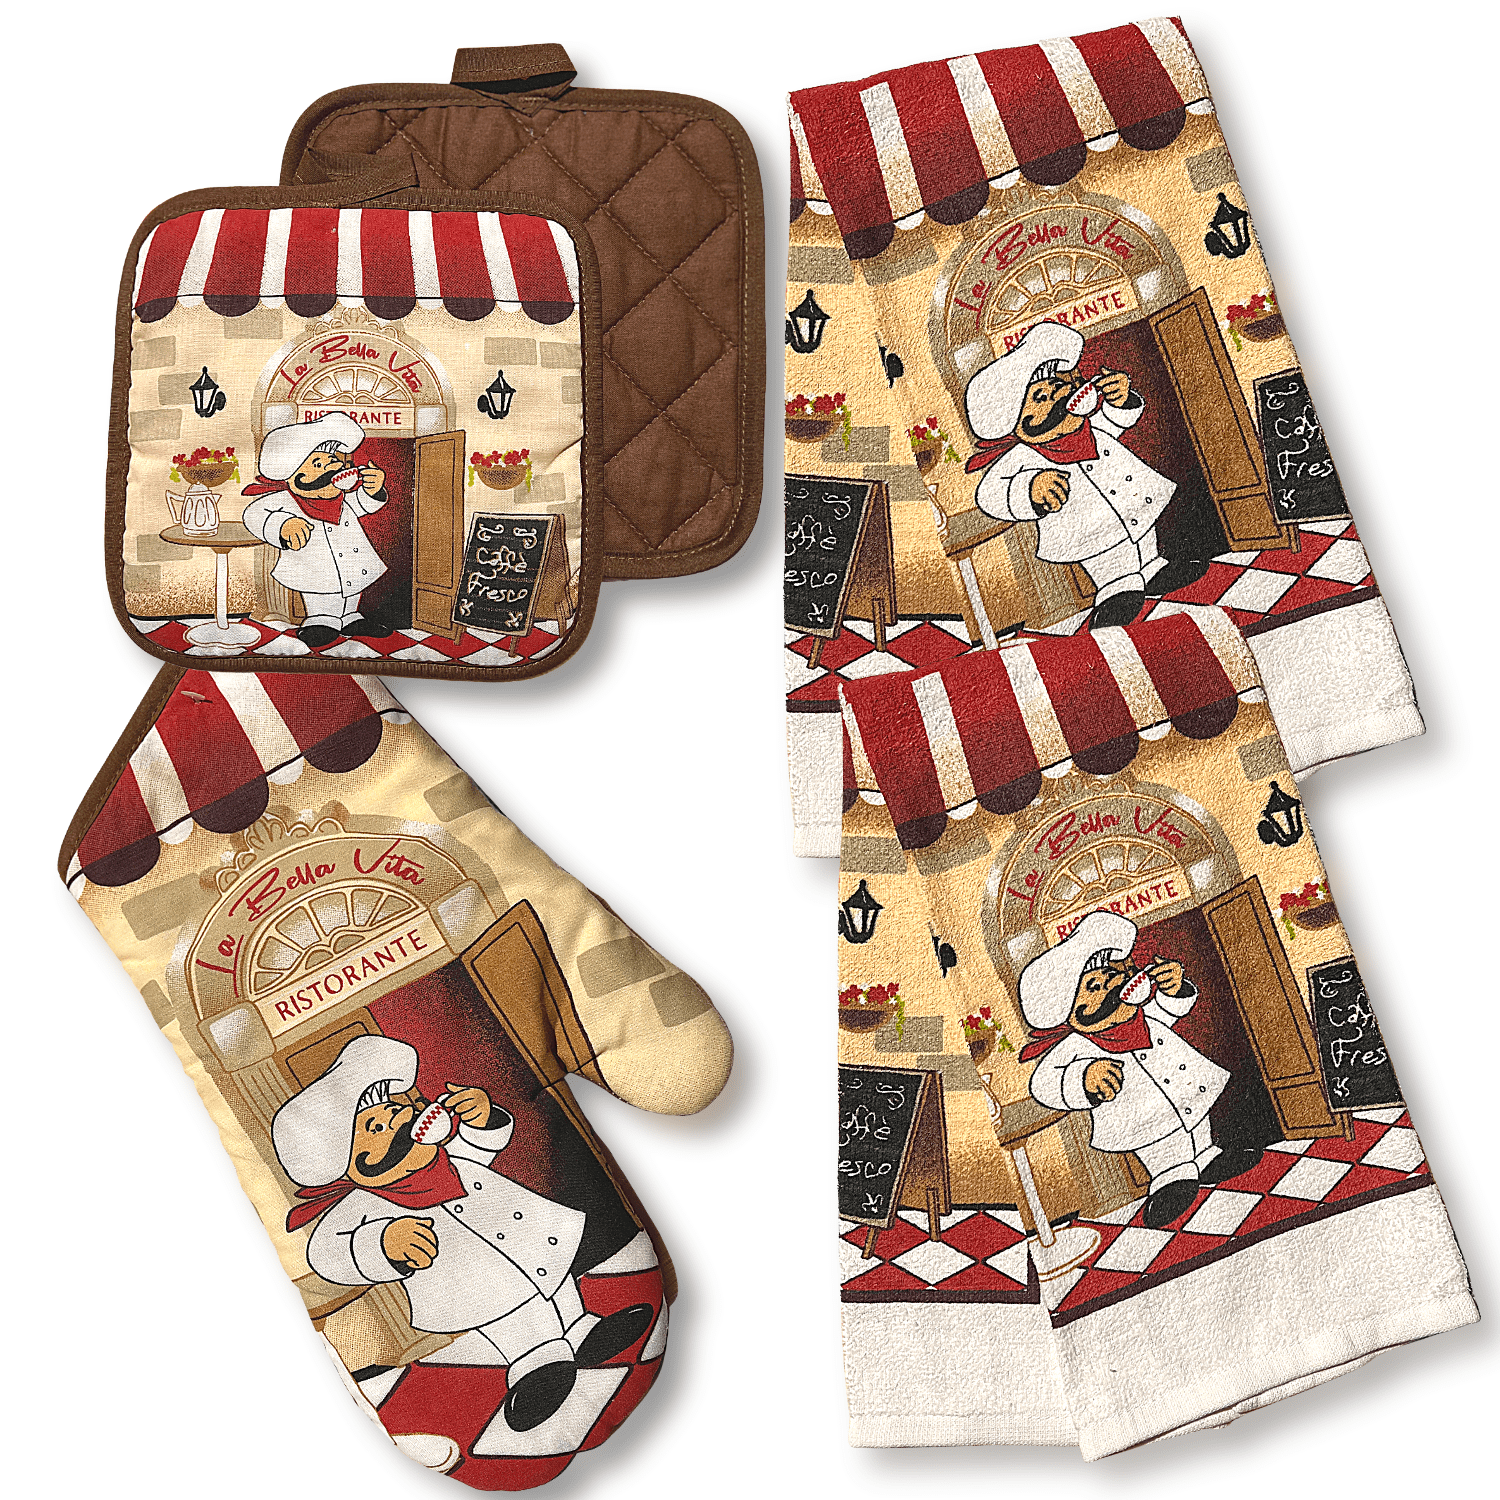 2 CHEFS IN KITCHEN by KC 5 pc SET 2 POT HOLDERS,1 OVEN MITT & 2 TOWELS 